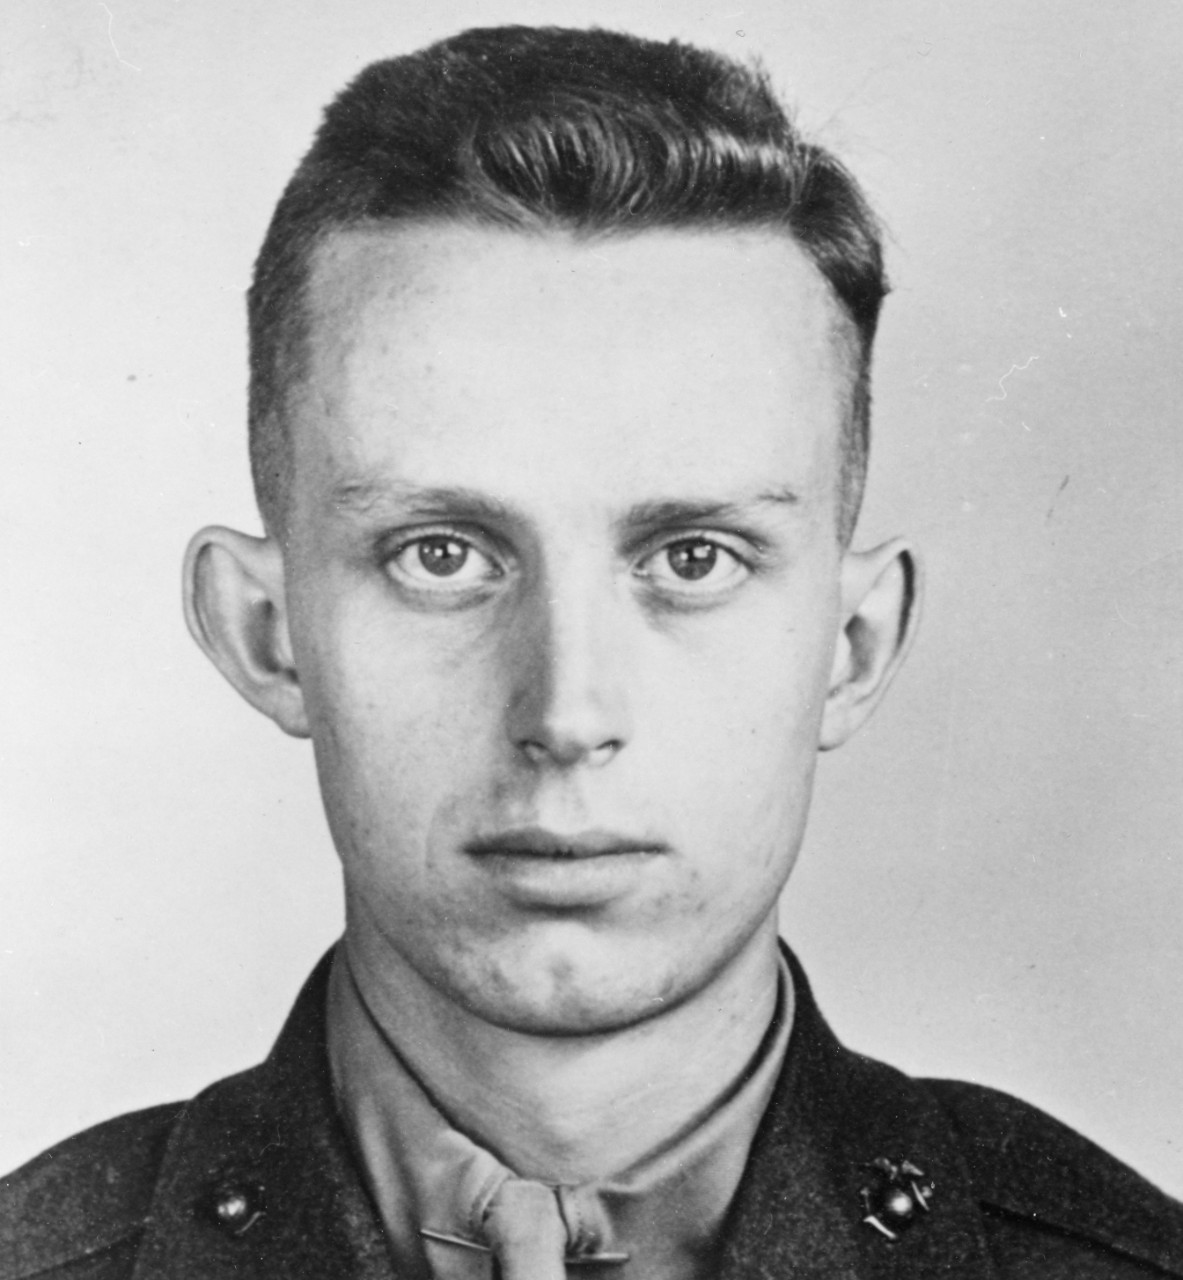 Private William G. Turner, USMC. view taken 16 January 1941. He was awarded a Bronze Star (posthumously) for supplying machine gun ammunition to the operator of a machine gun at Ewa Mooring Mast Field, during the Japanese attack on 7 December 1941.